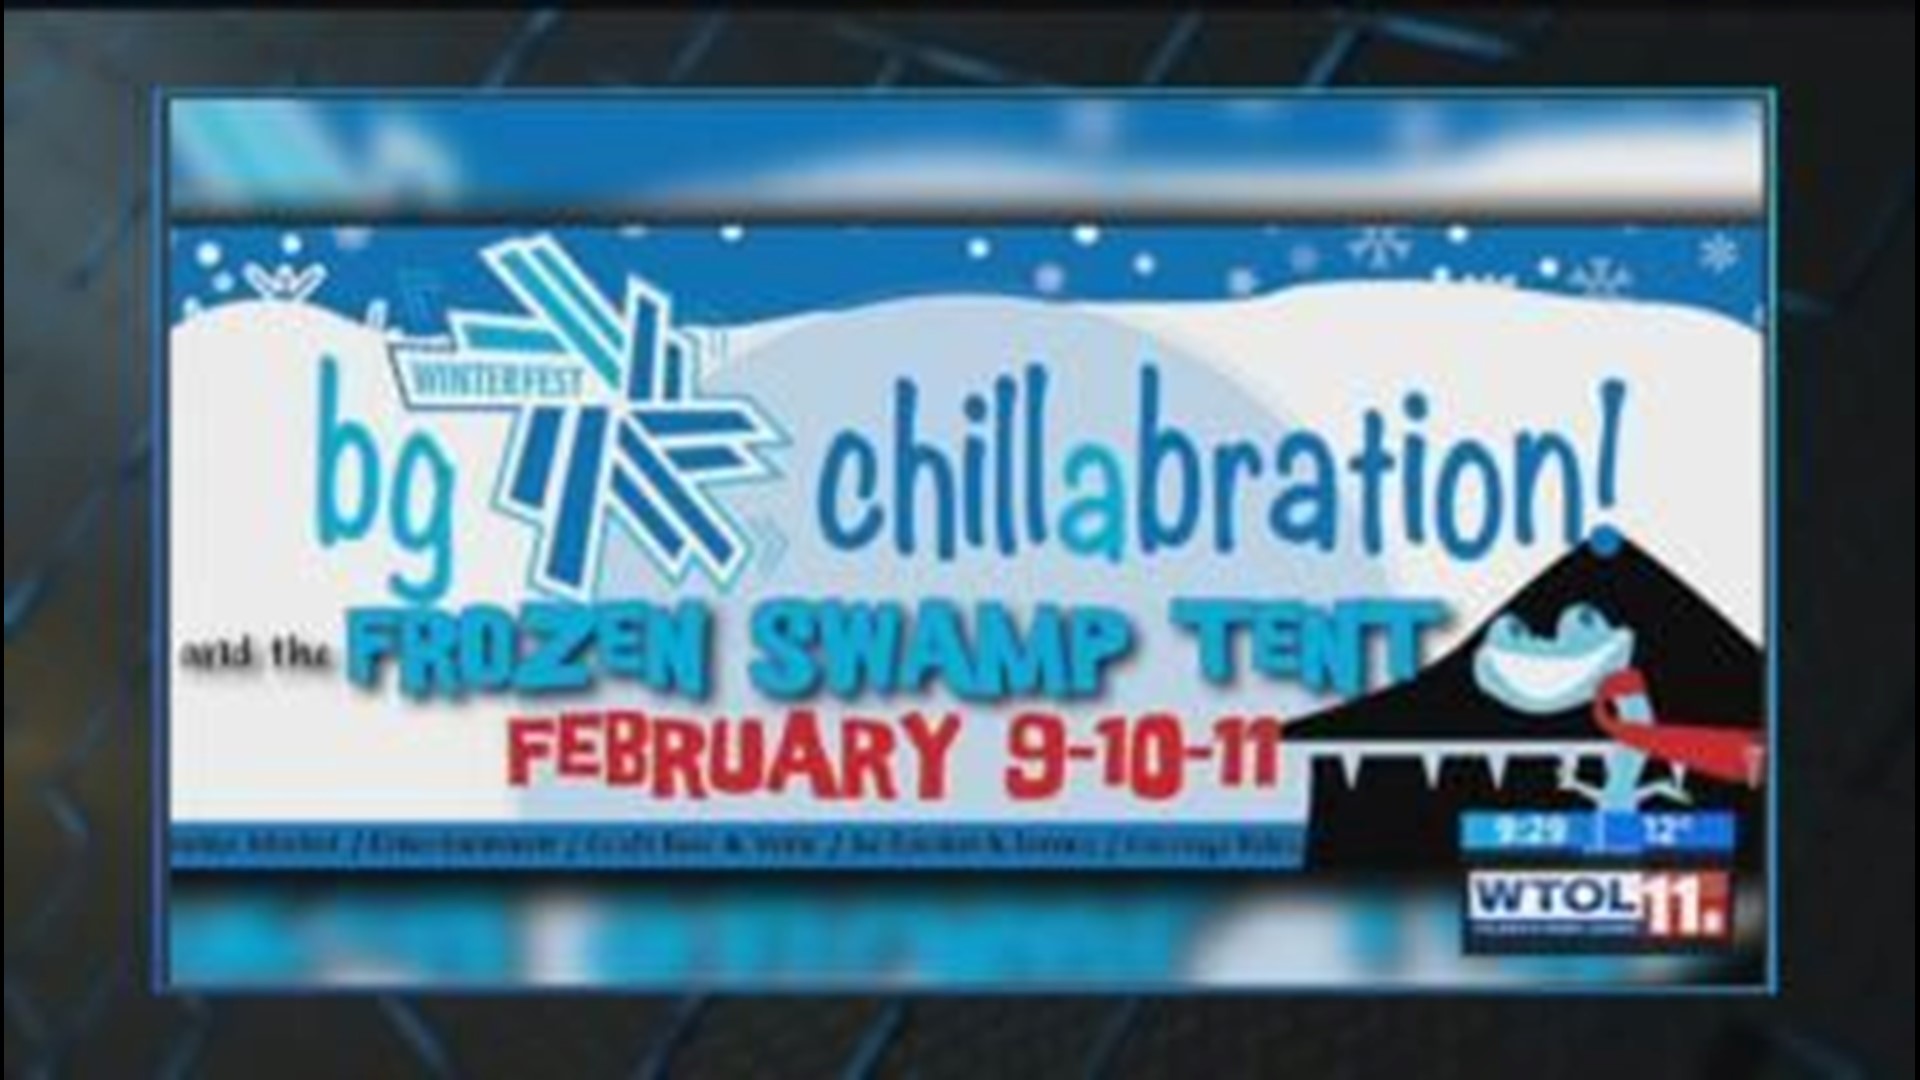 Chill out this weekend at the BG Chillabration